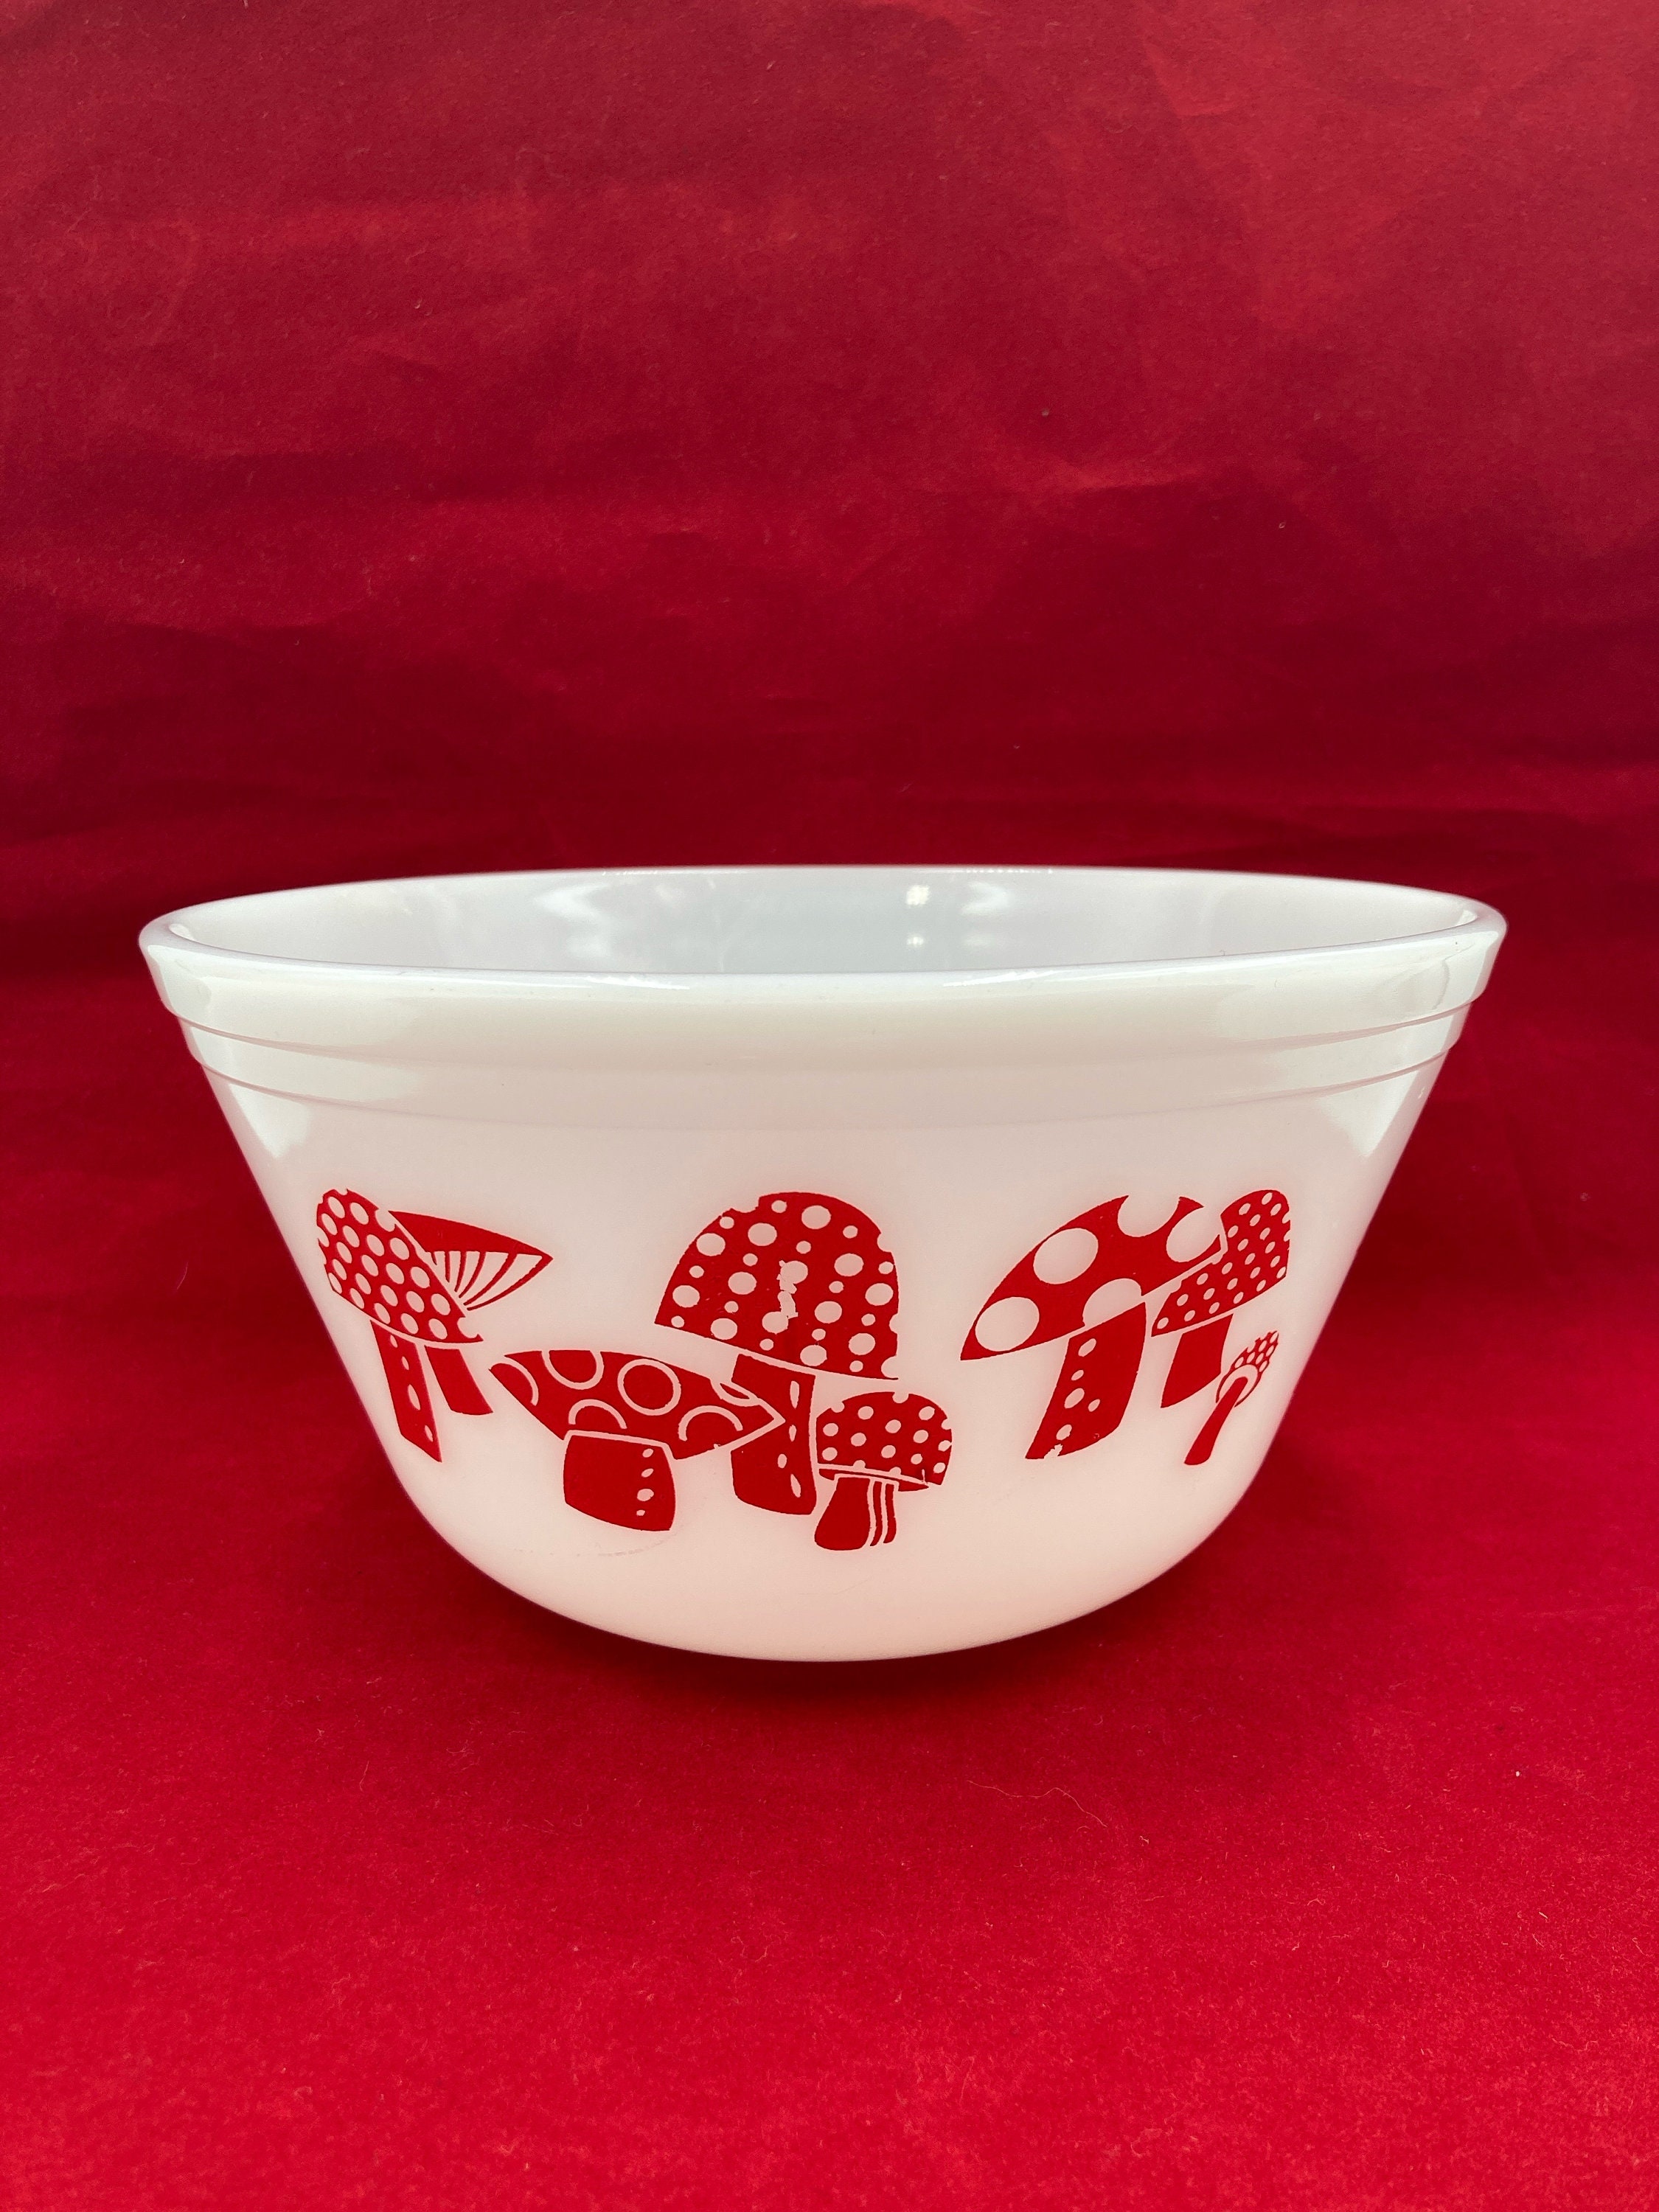 Early meal bowl - red mushrooms (cutlery / used goods / old things